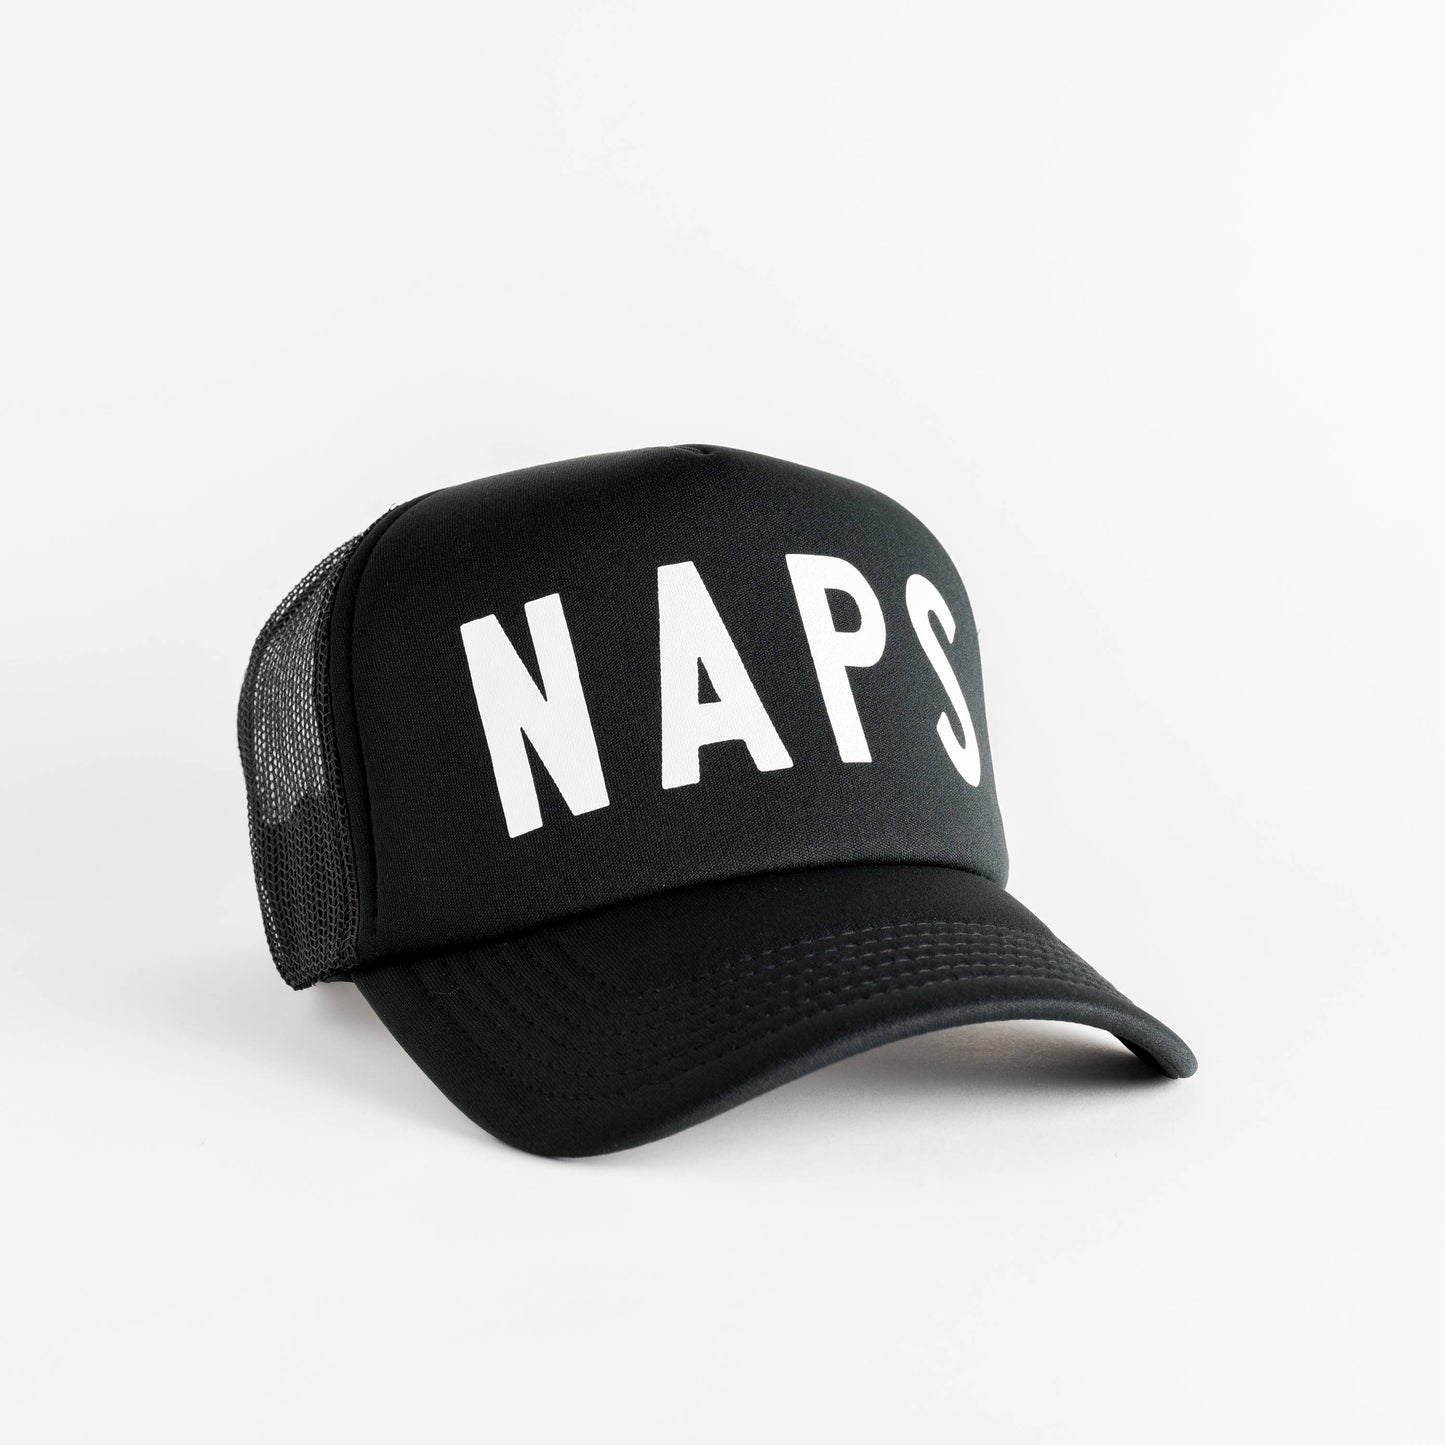 Naps Recycled Woman's Trucker Hat - black